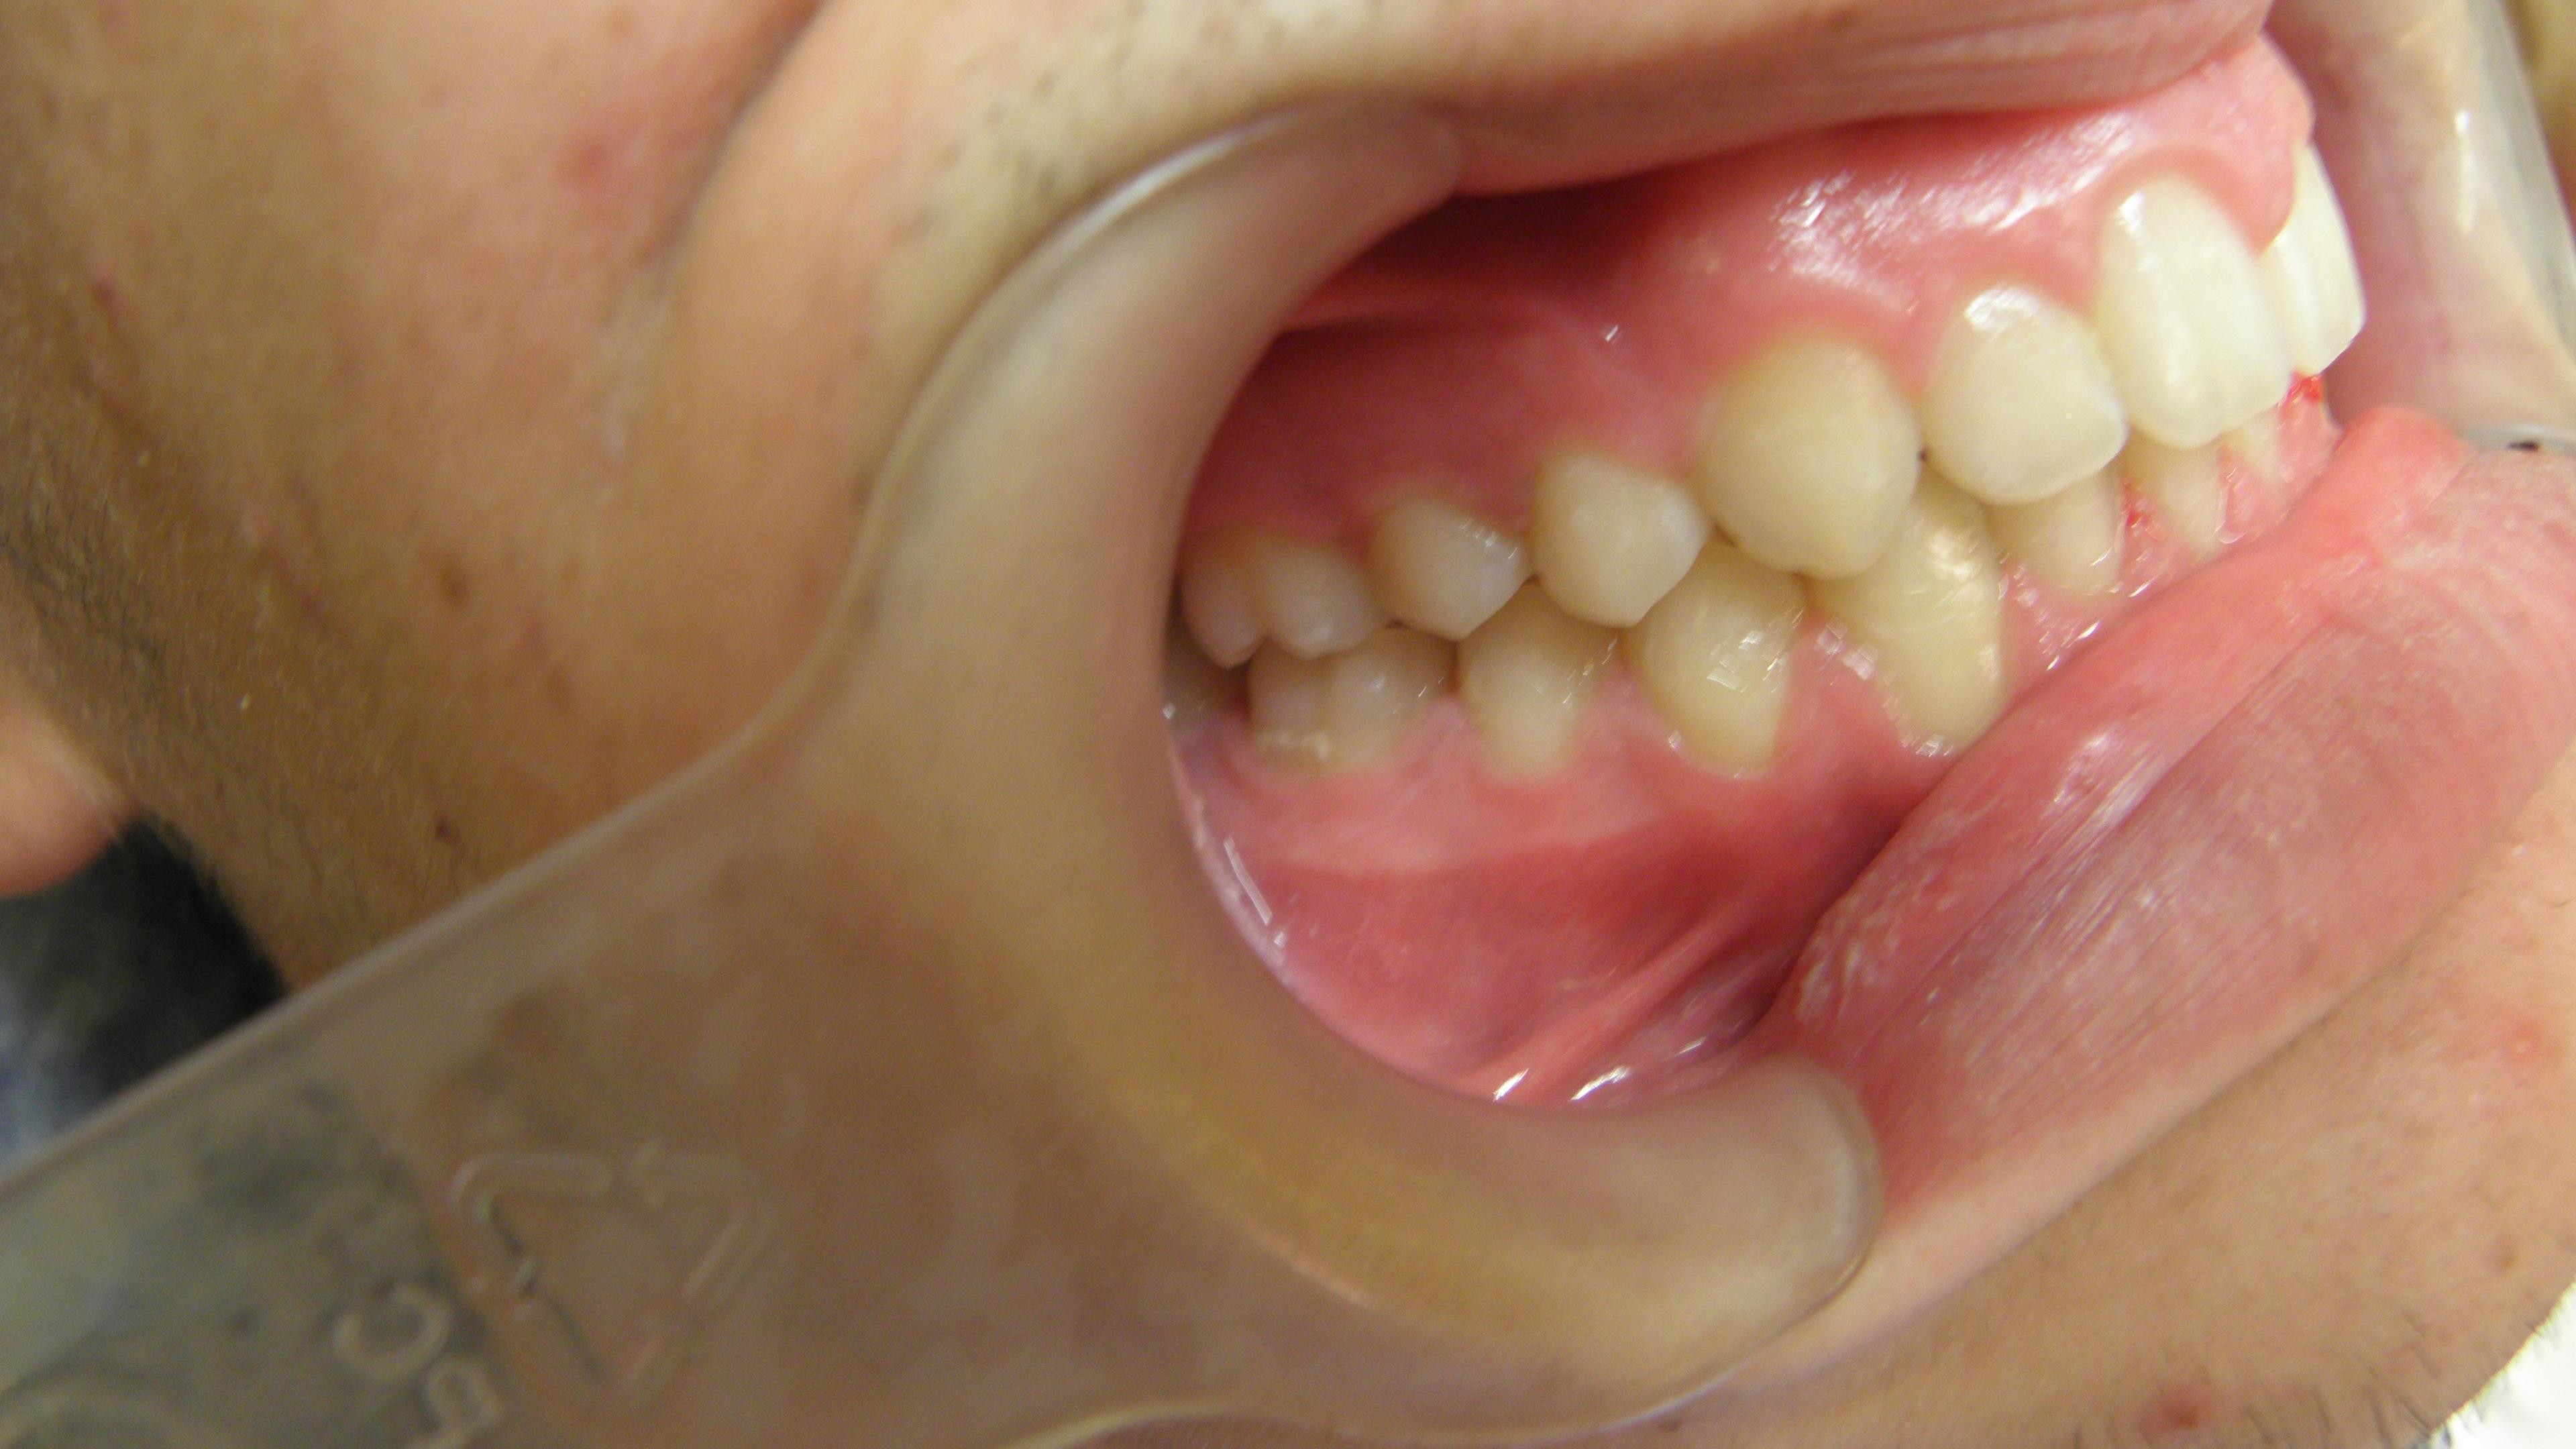 Orthodontc treatment in children After treatment - Upper dental arch constriction